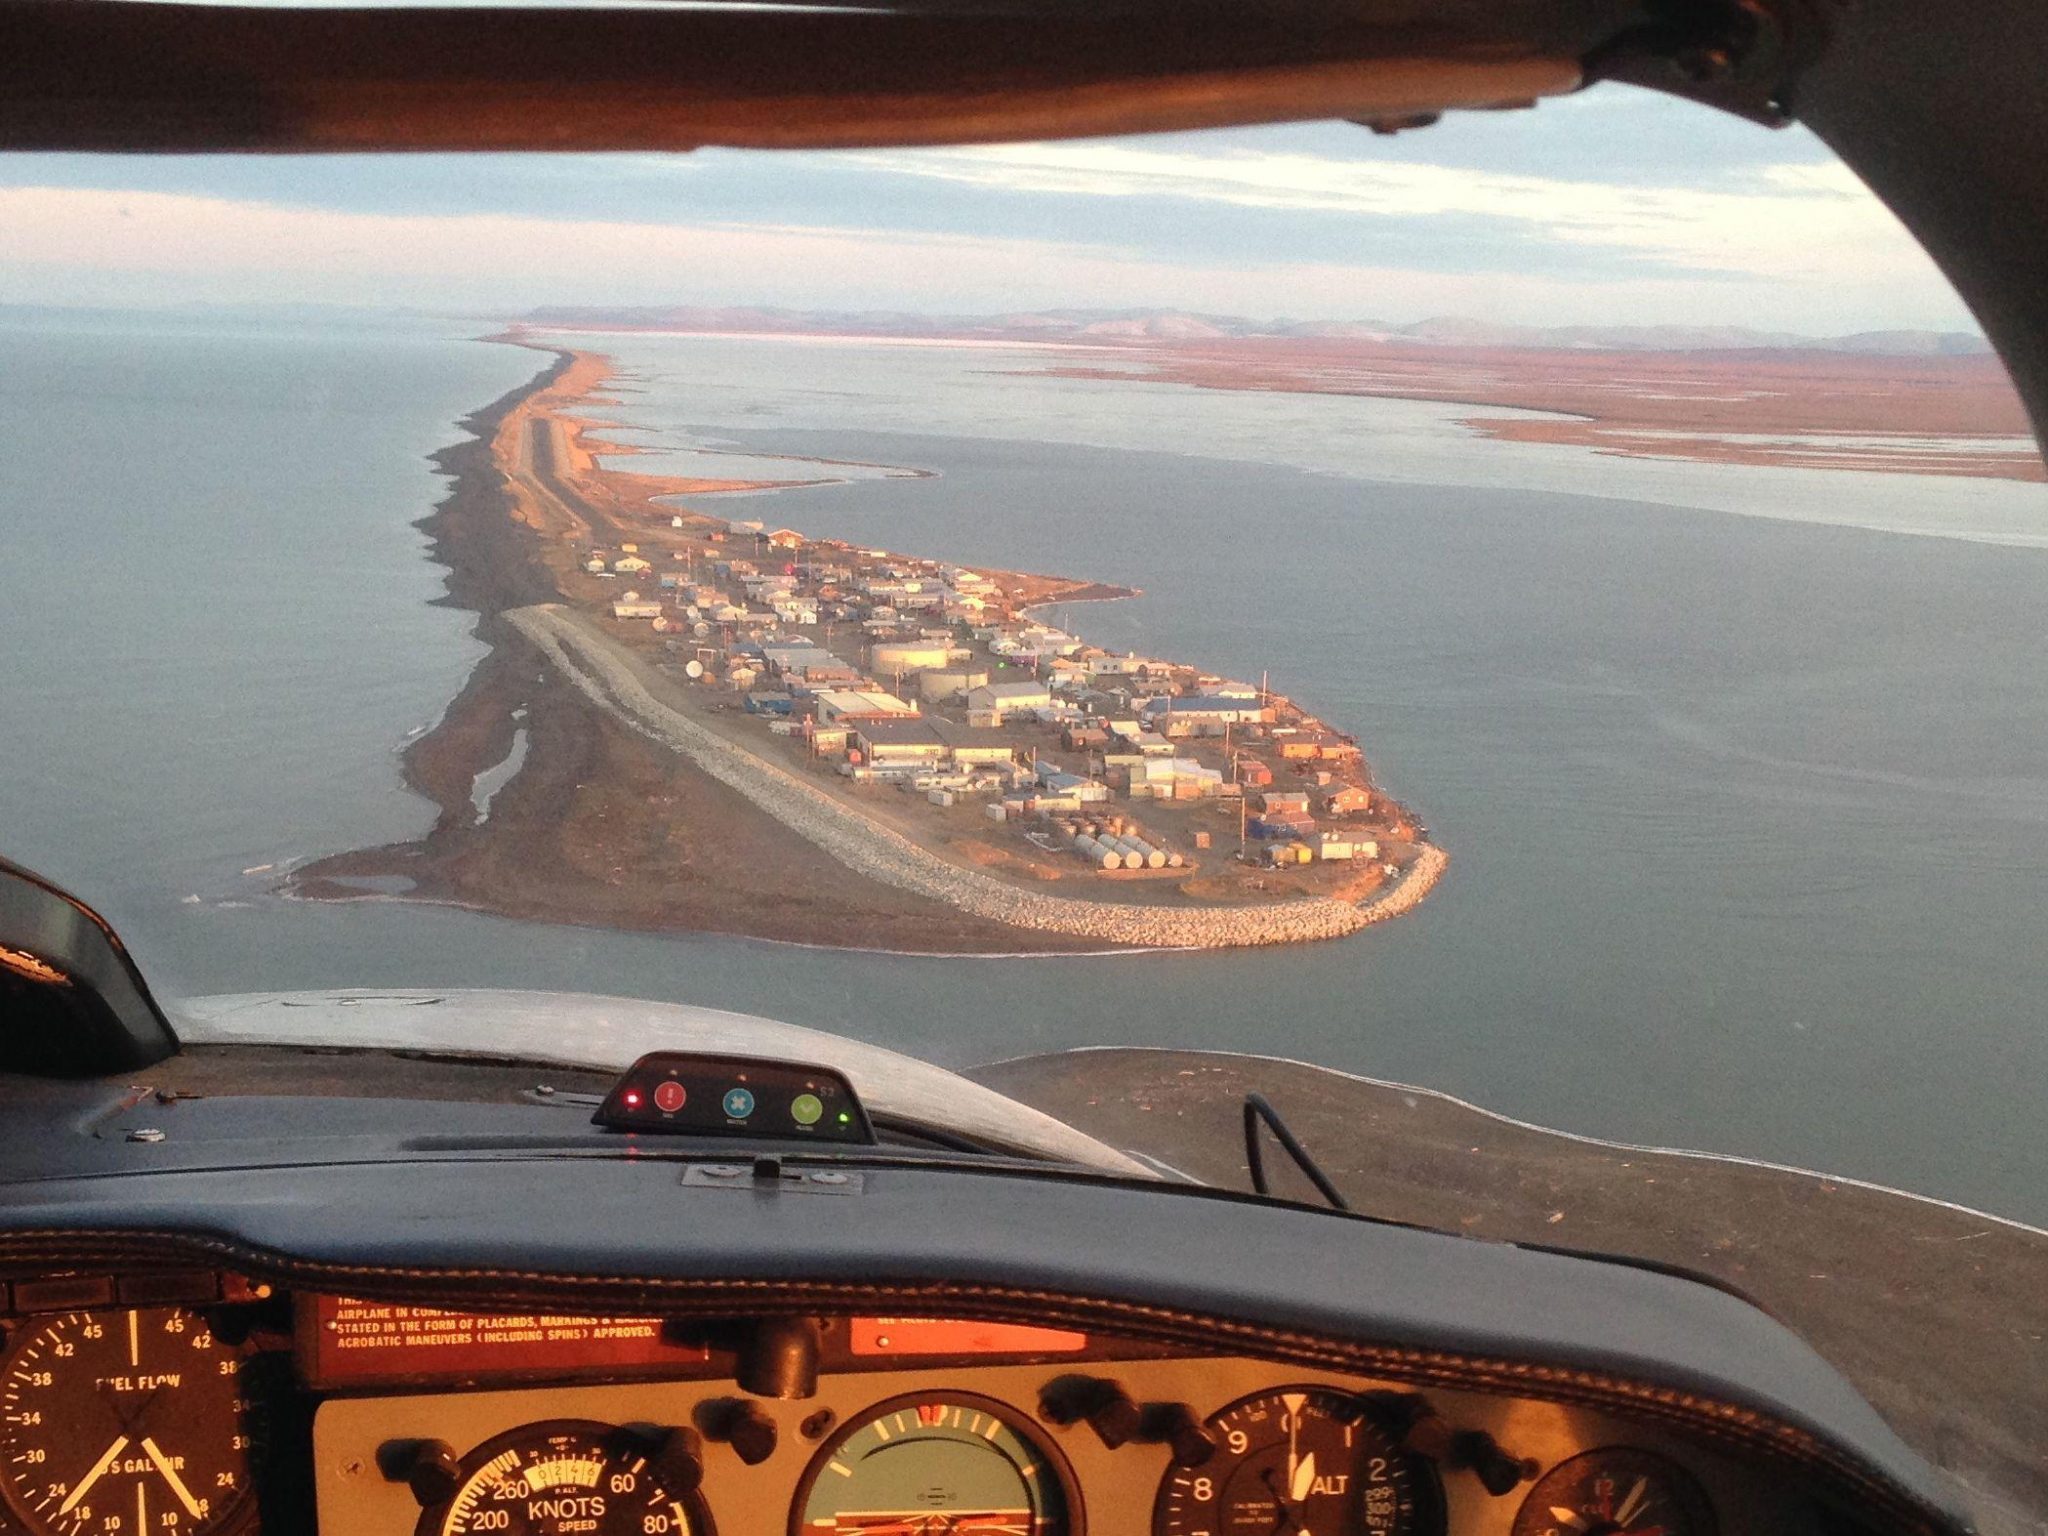 A view of a village at the end of a spit as seen through an airplane cockpit